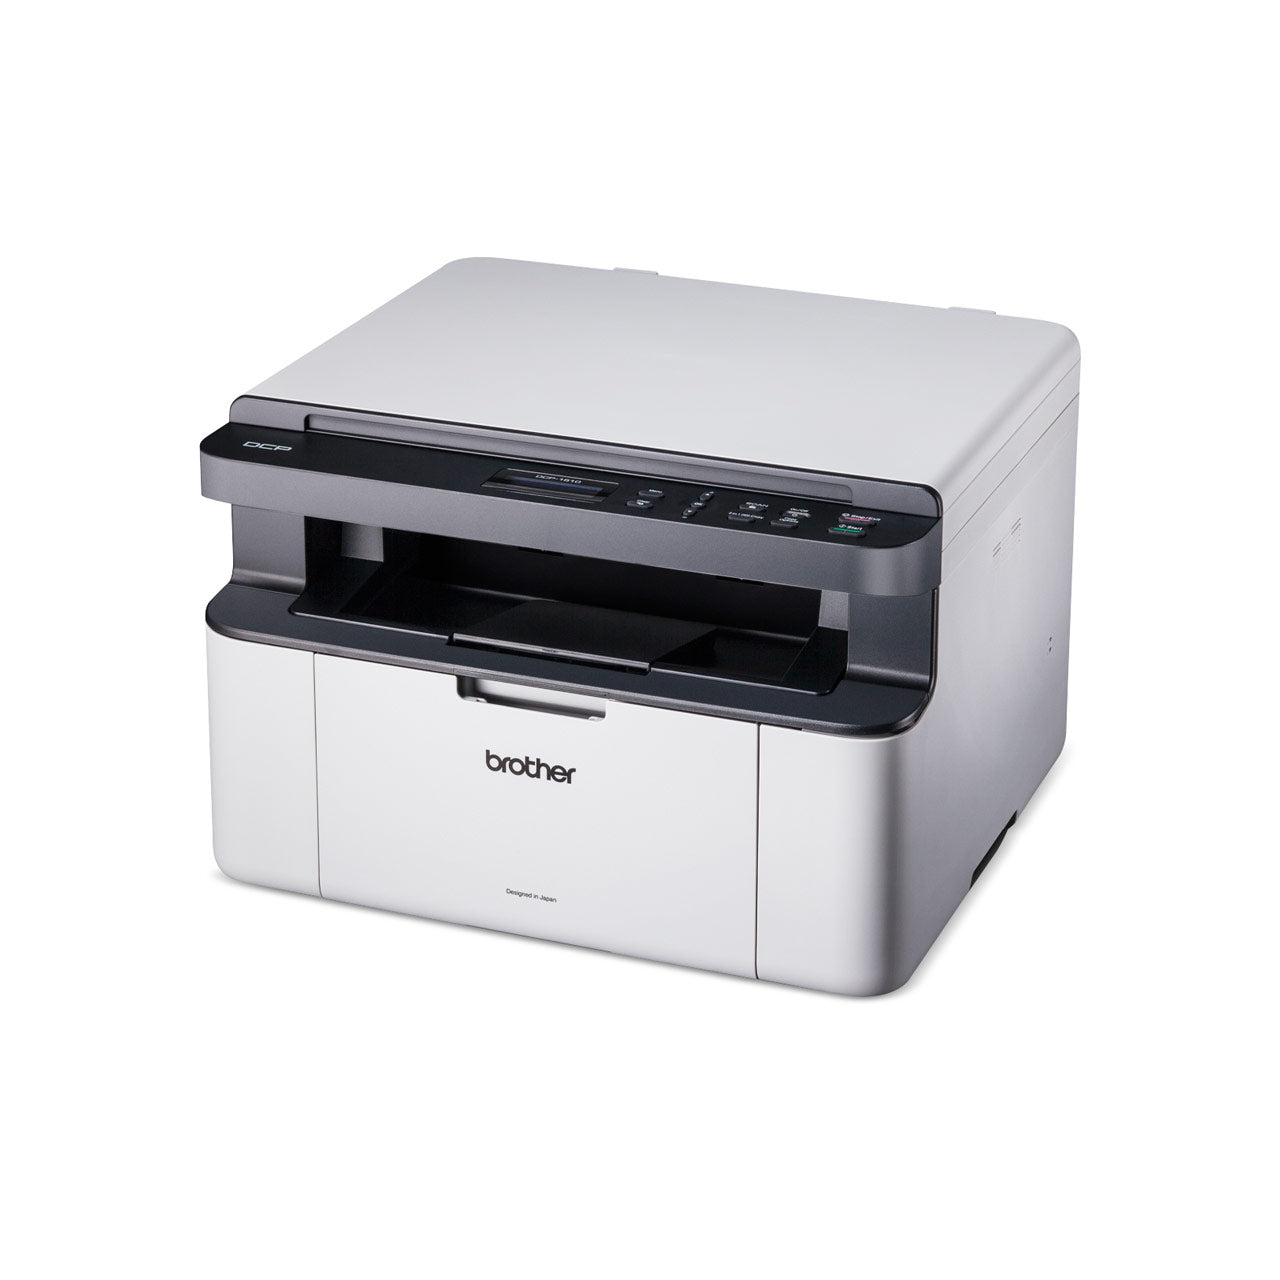 Brother DCP-1510 Laser Printer (DCP-1510)